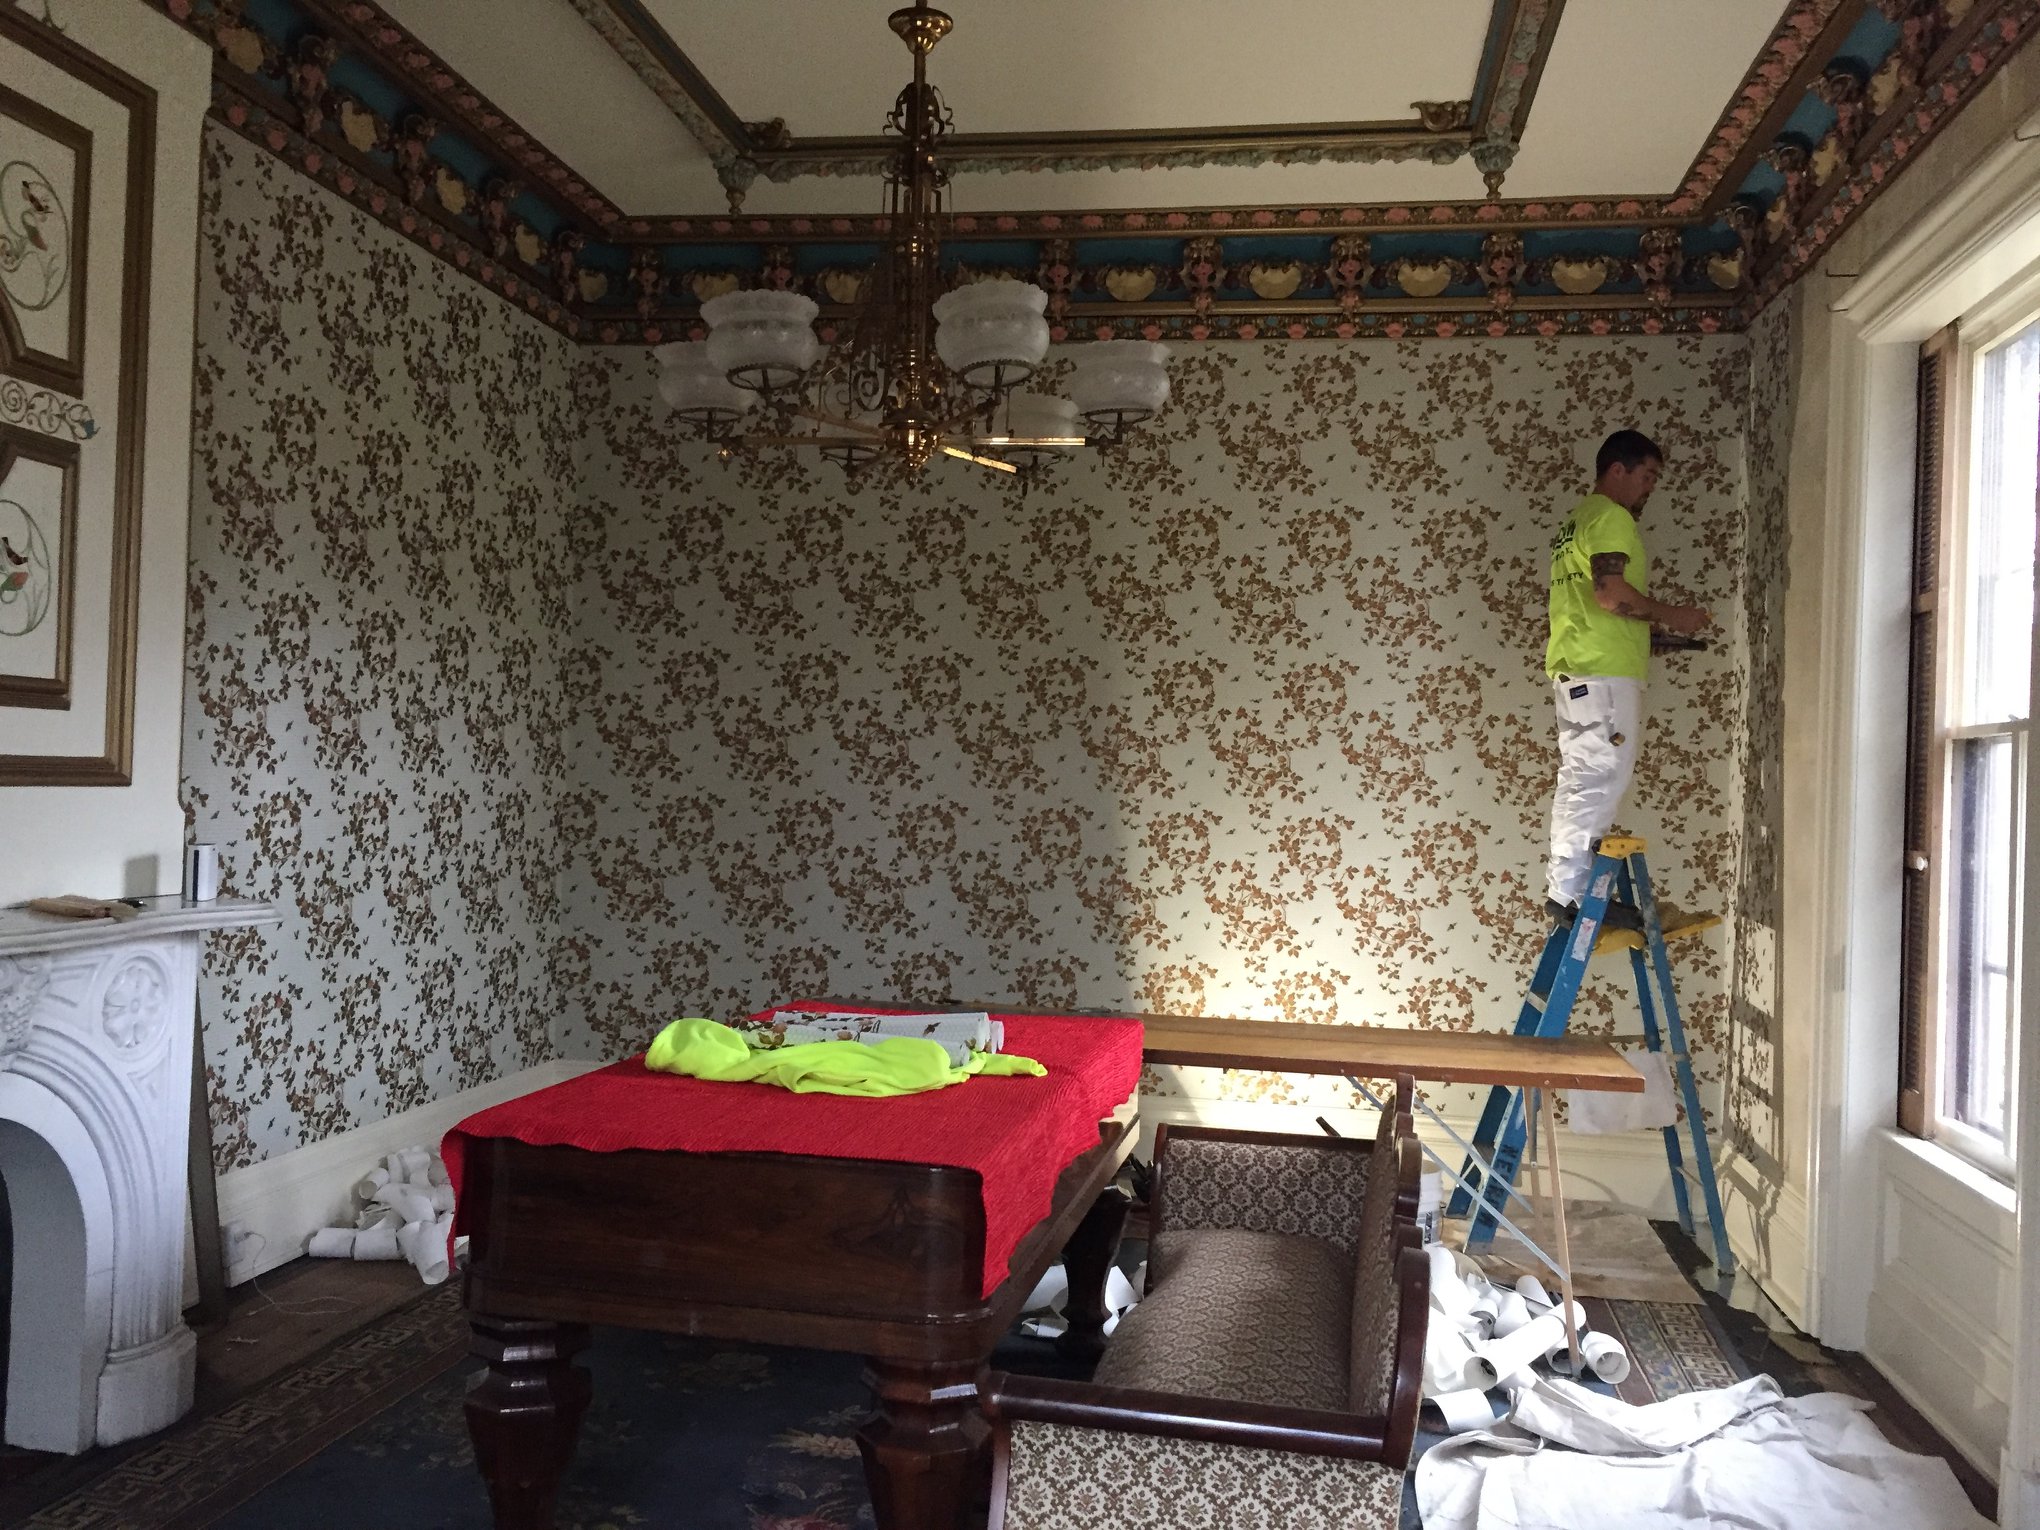 #TBT: The 2014 Tanner House Parlor Refurbishment